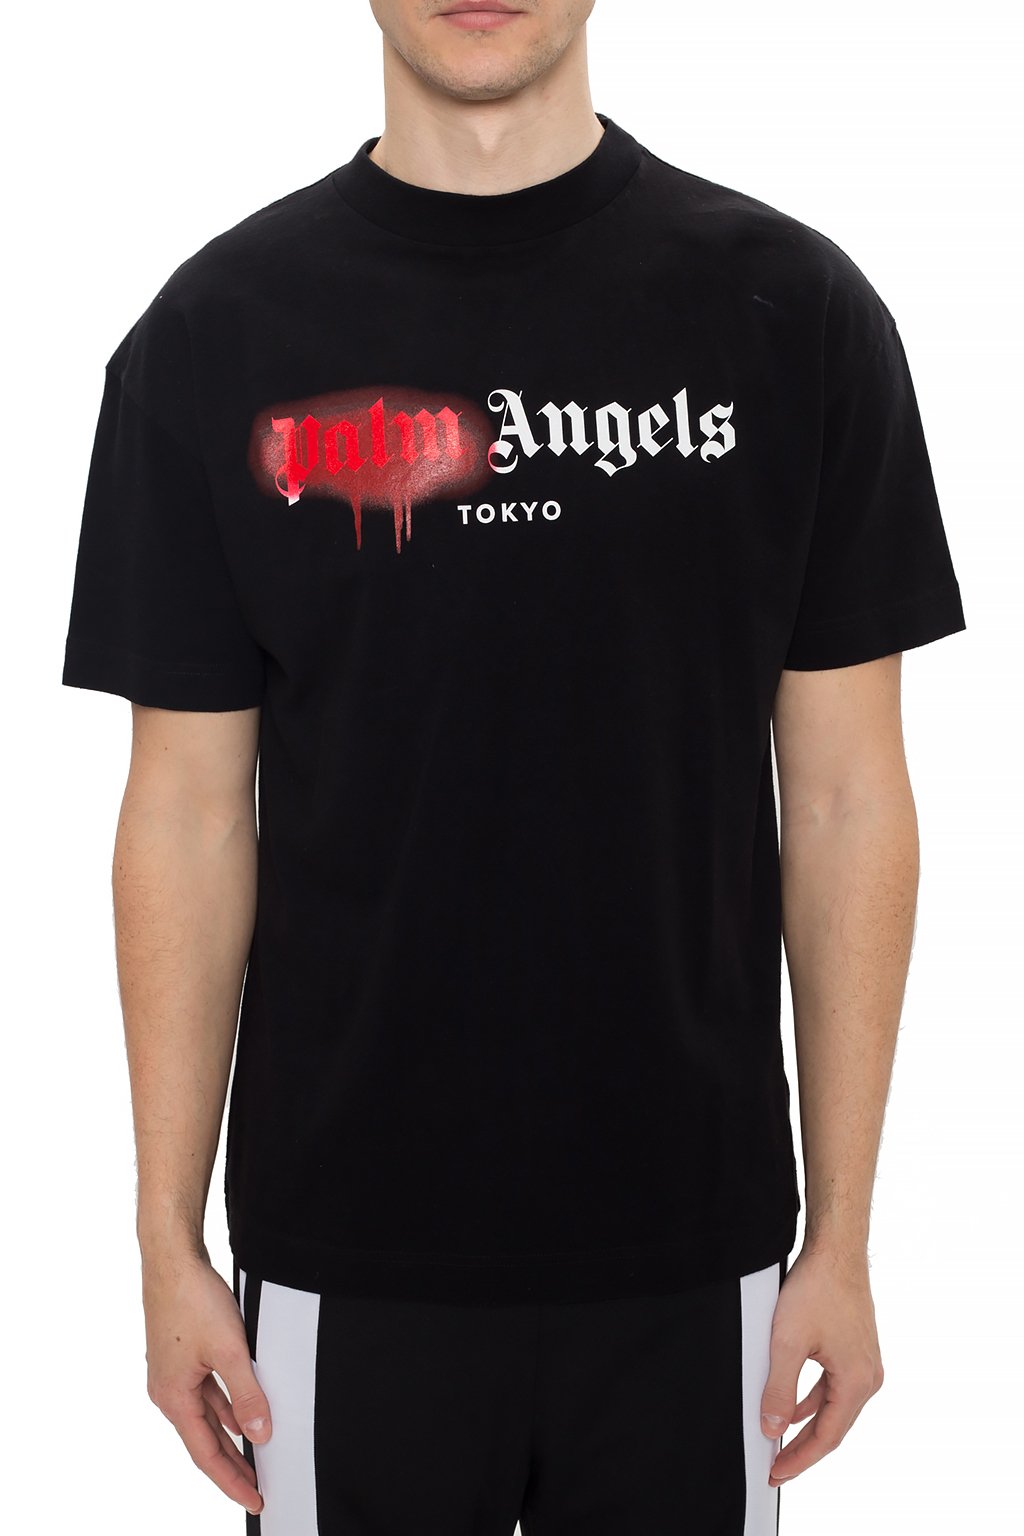 black and red palm angels t shirt